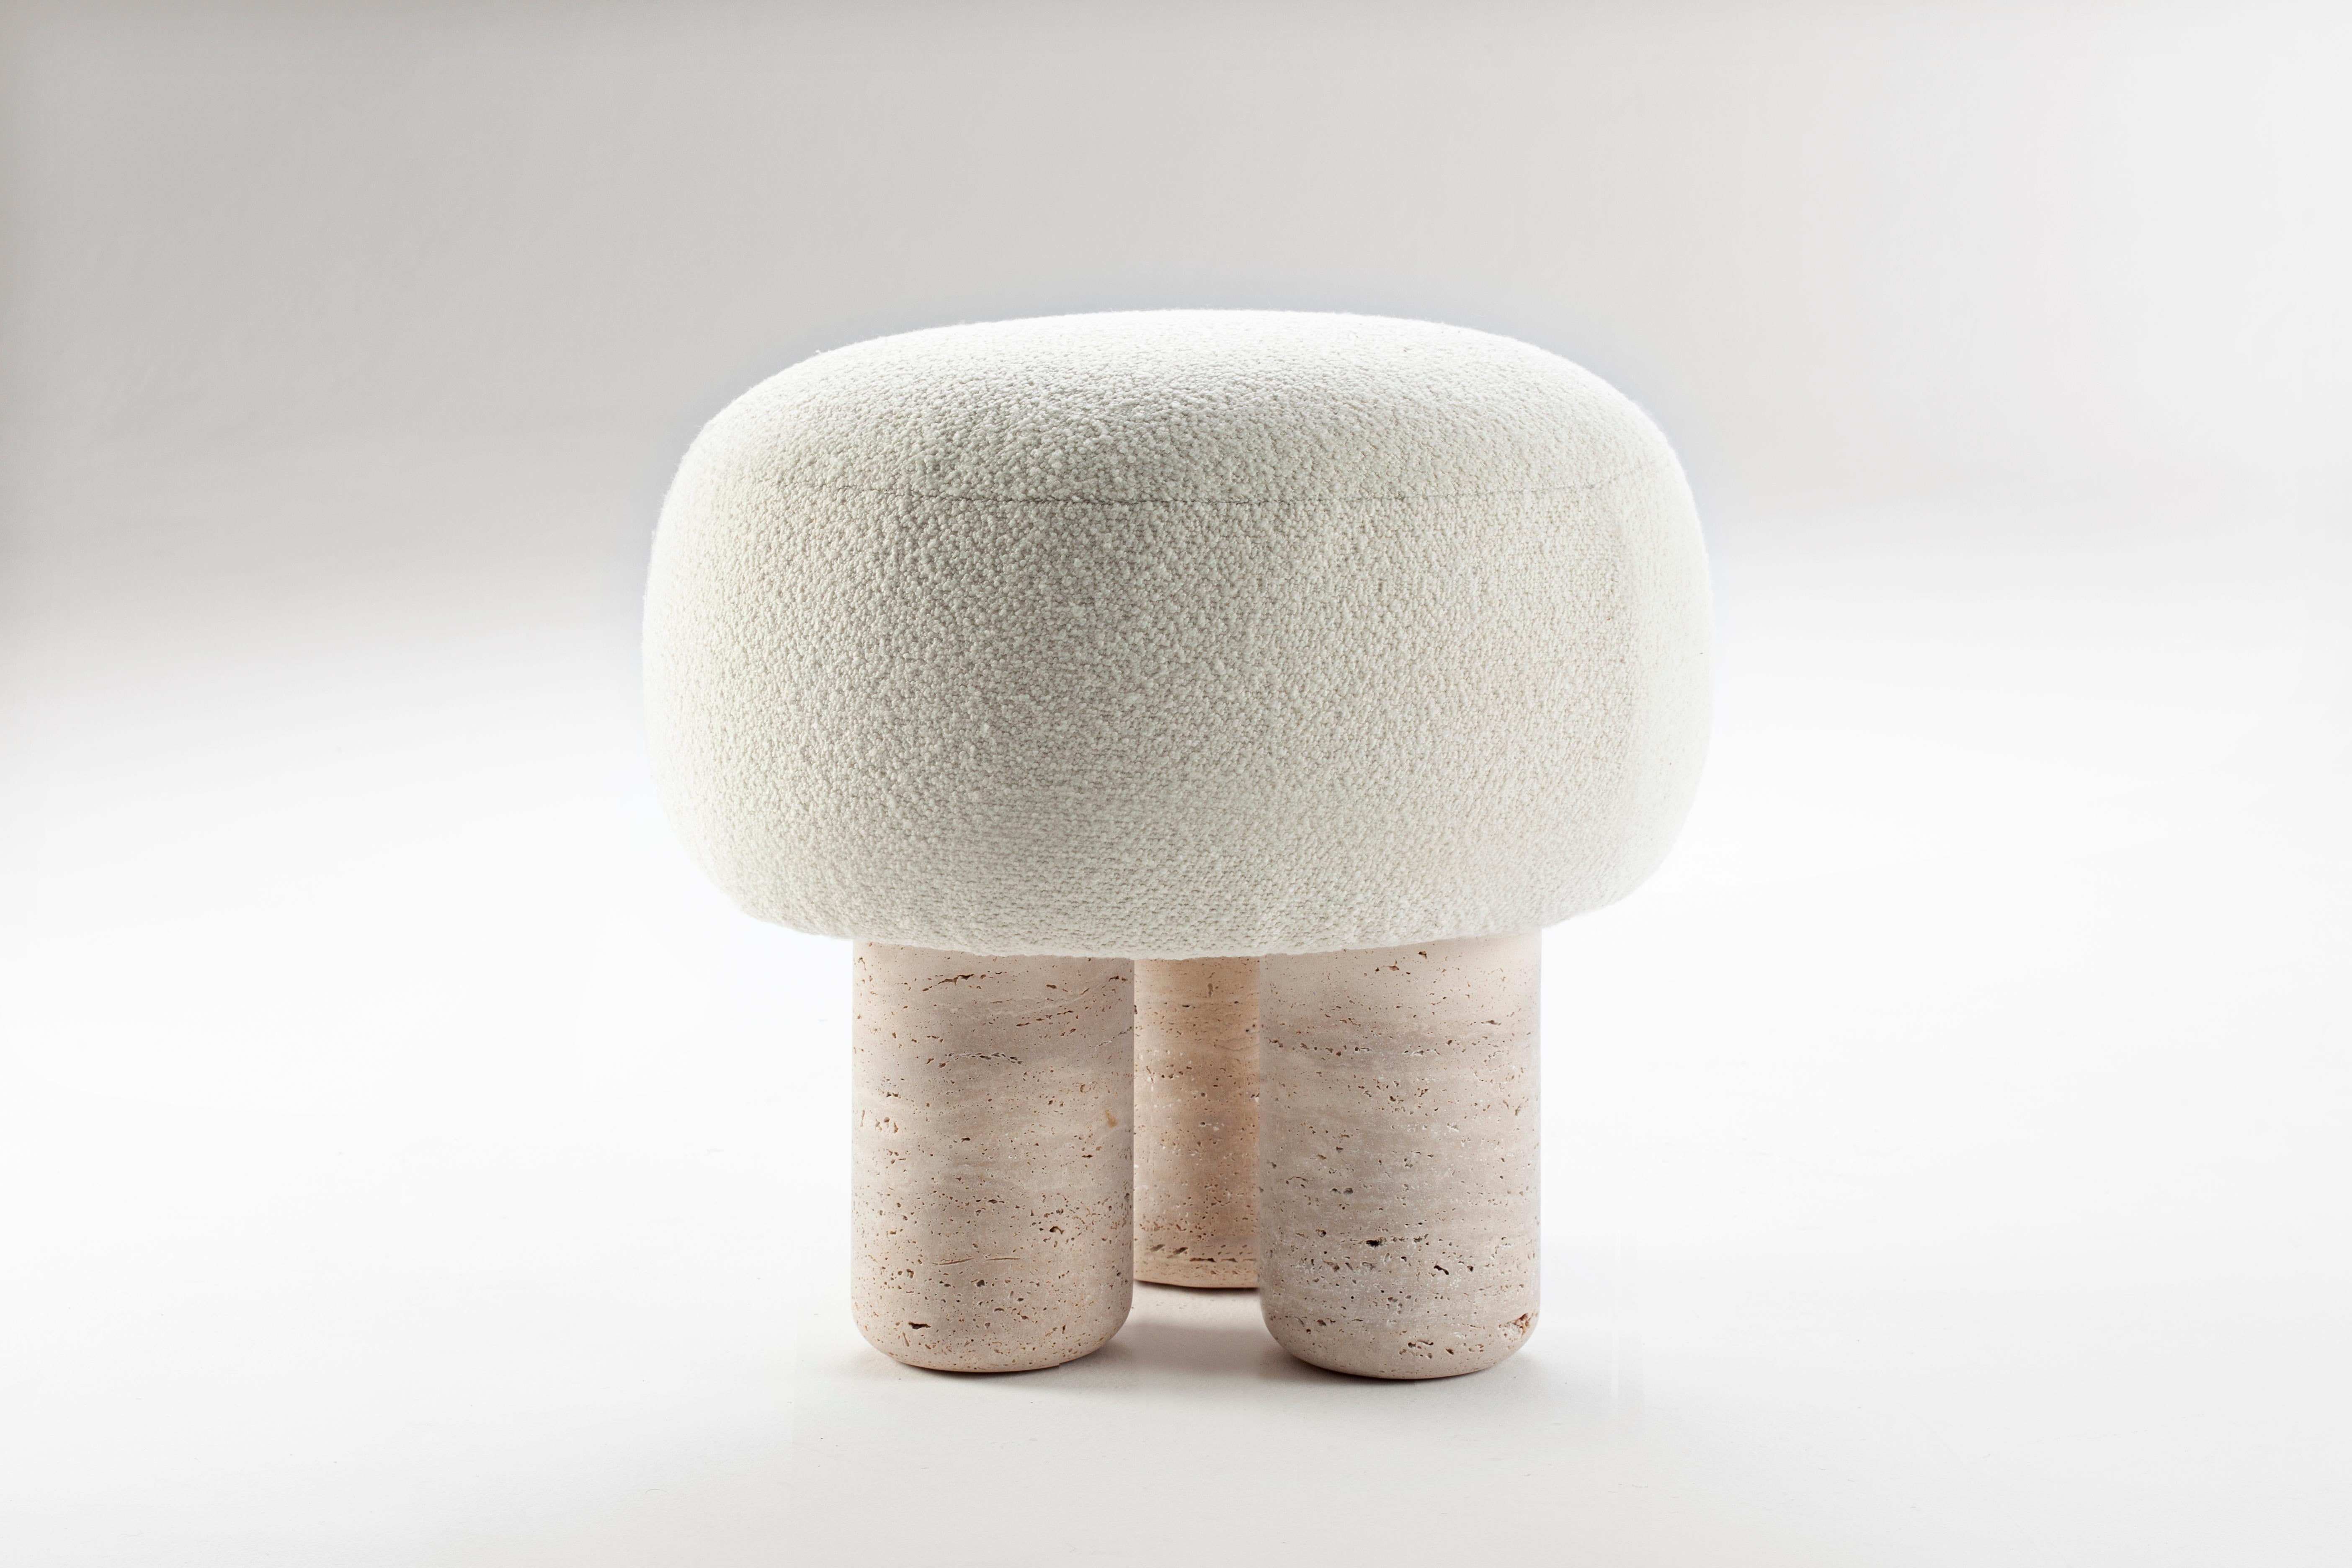 Unique Hygge Stool by Collector
Dimensions: D 45 x H 44 cm
Materials: Fabric, Travertino
Other materials available. 

The Collector brand aims to be part of the daily life by fusing furniture to our home routine and lifestyle, that’s why we’ve